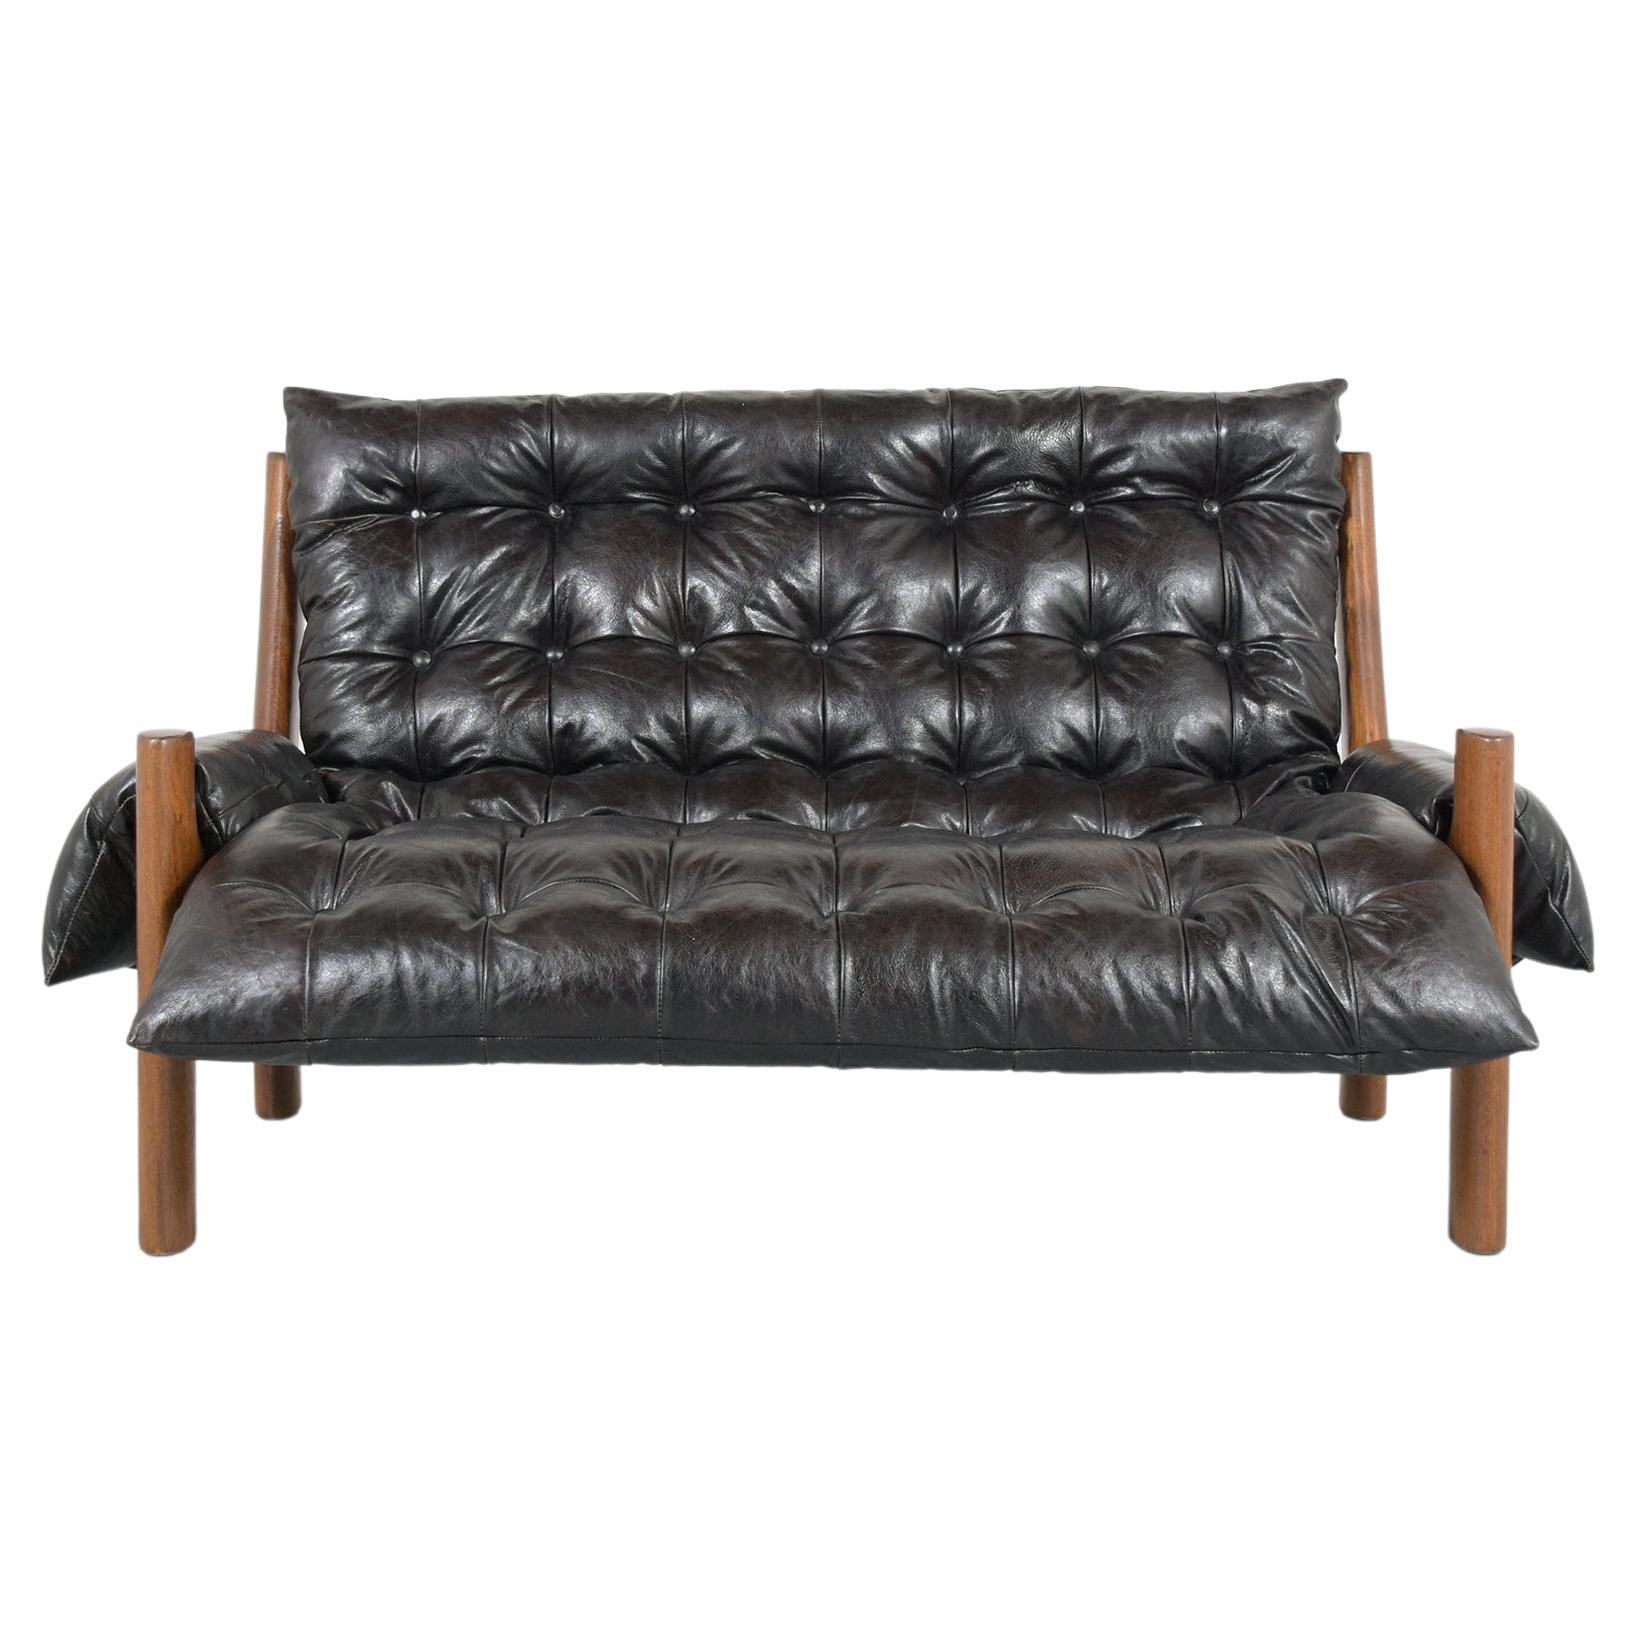 This extraordinary vintage mid-century modern sofa in the manner of Sergio Rodrigues is crafted out of teak wood in good condition and has been newly restored by our team of expert craftsmen. This sofa is composed of a solid rounded teak wood frame,